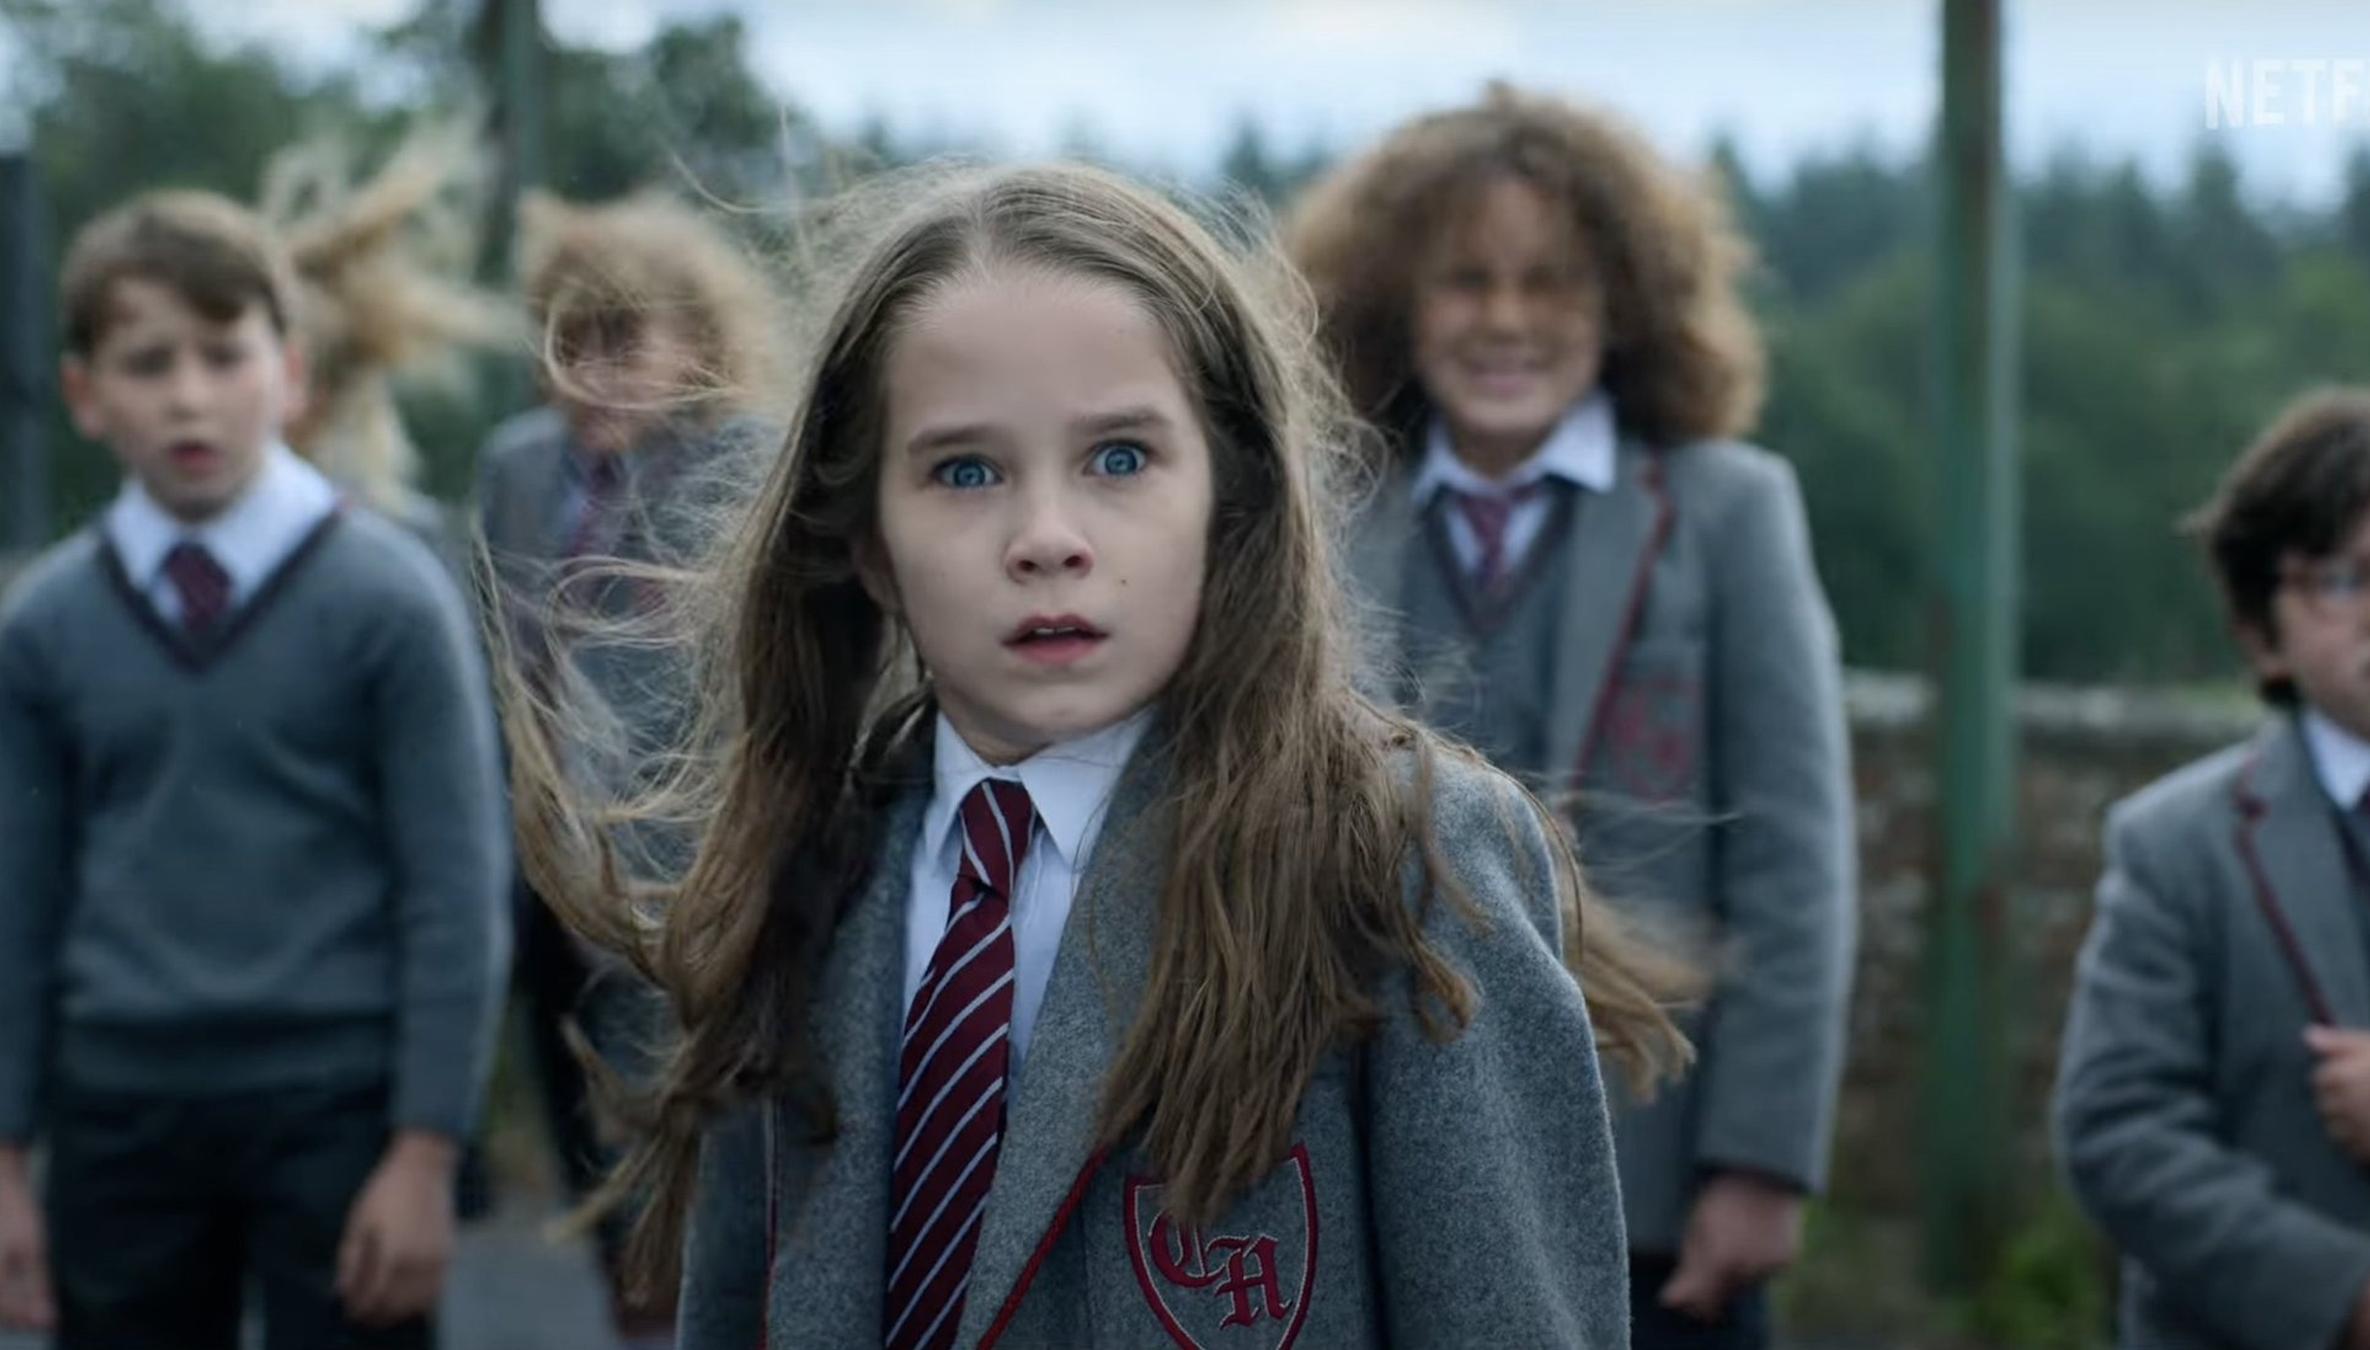 A Leading UK Casting Director Talks ‘Matilda’ + How to Stand Out